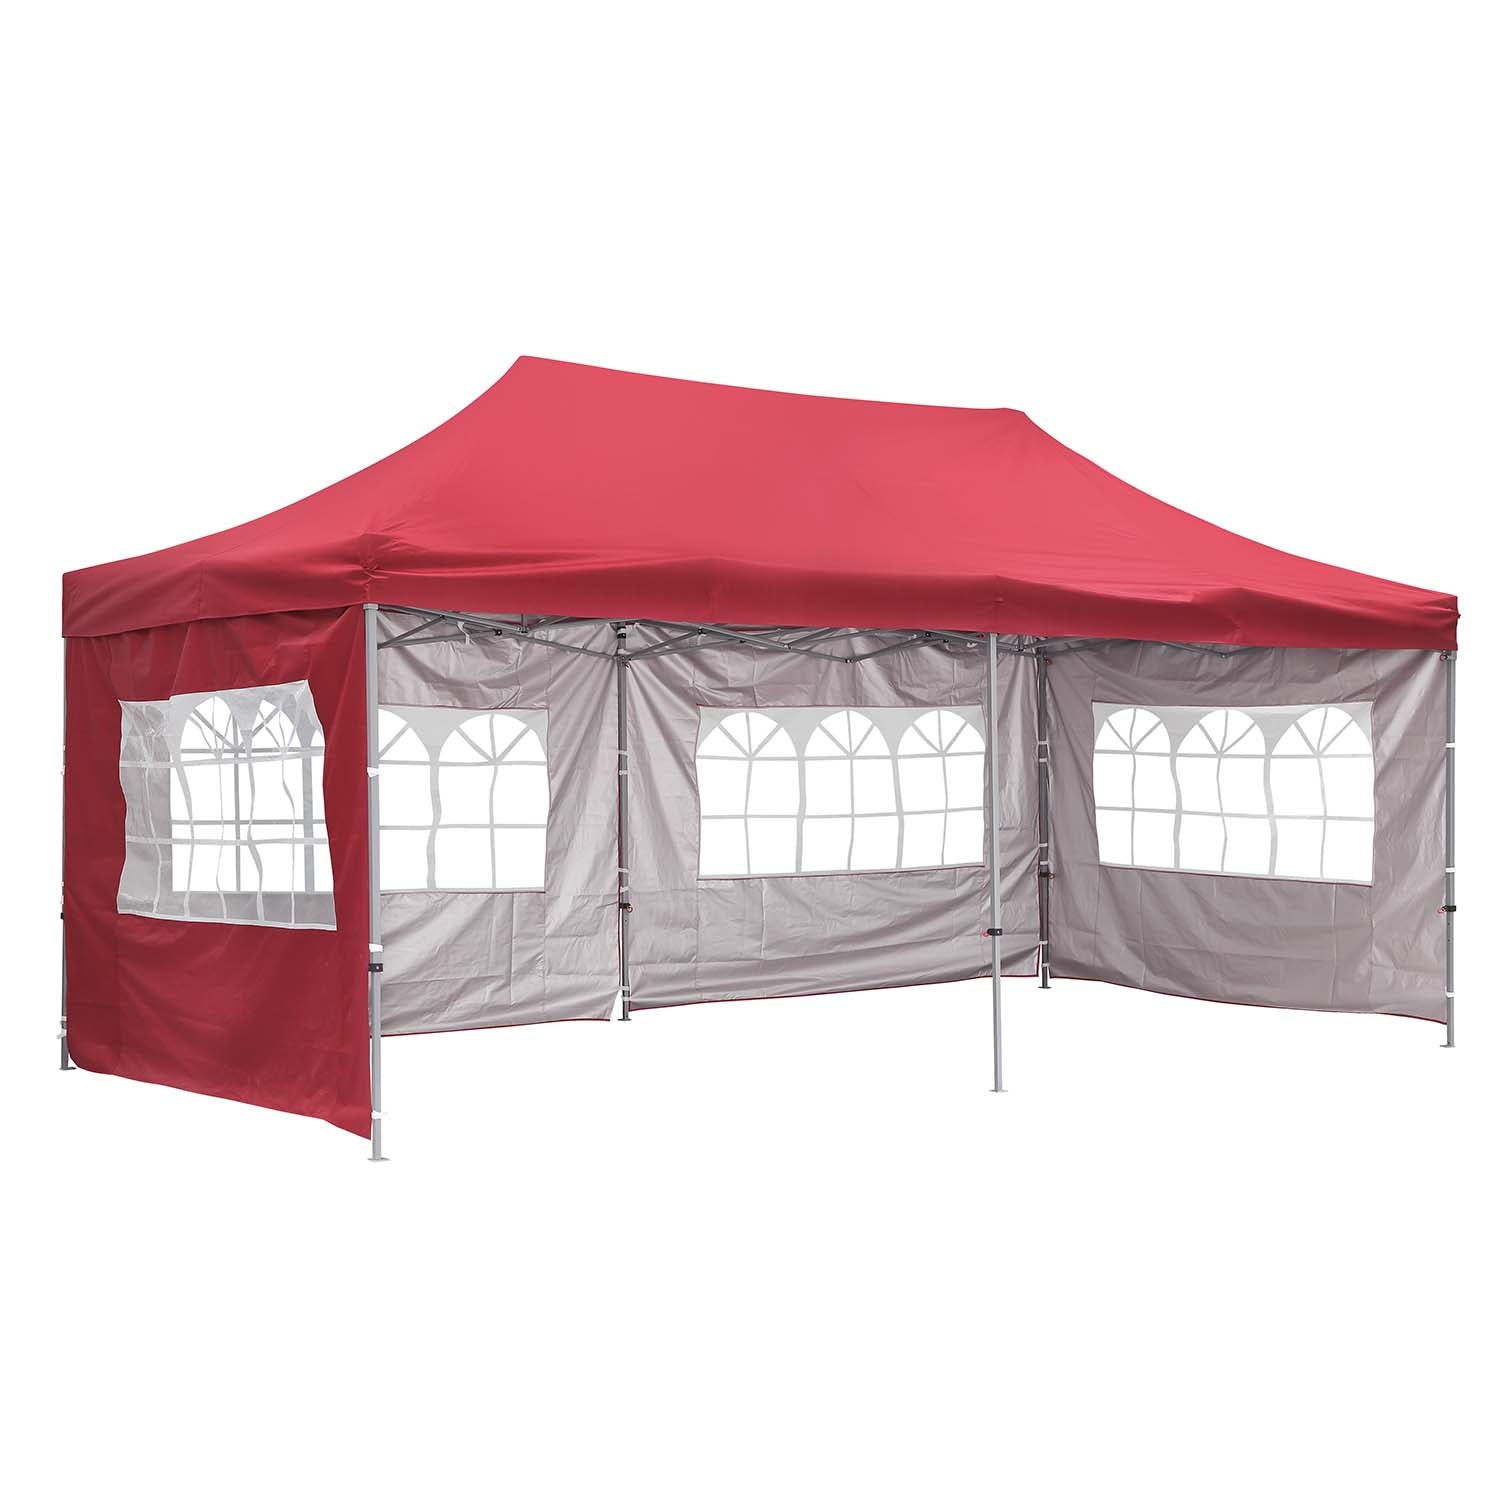 Ainfox 20' x 10' Red Instant Outdoor Canopie